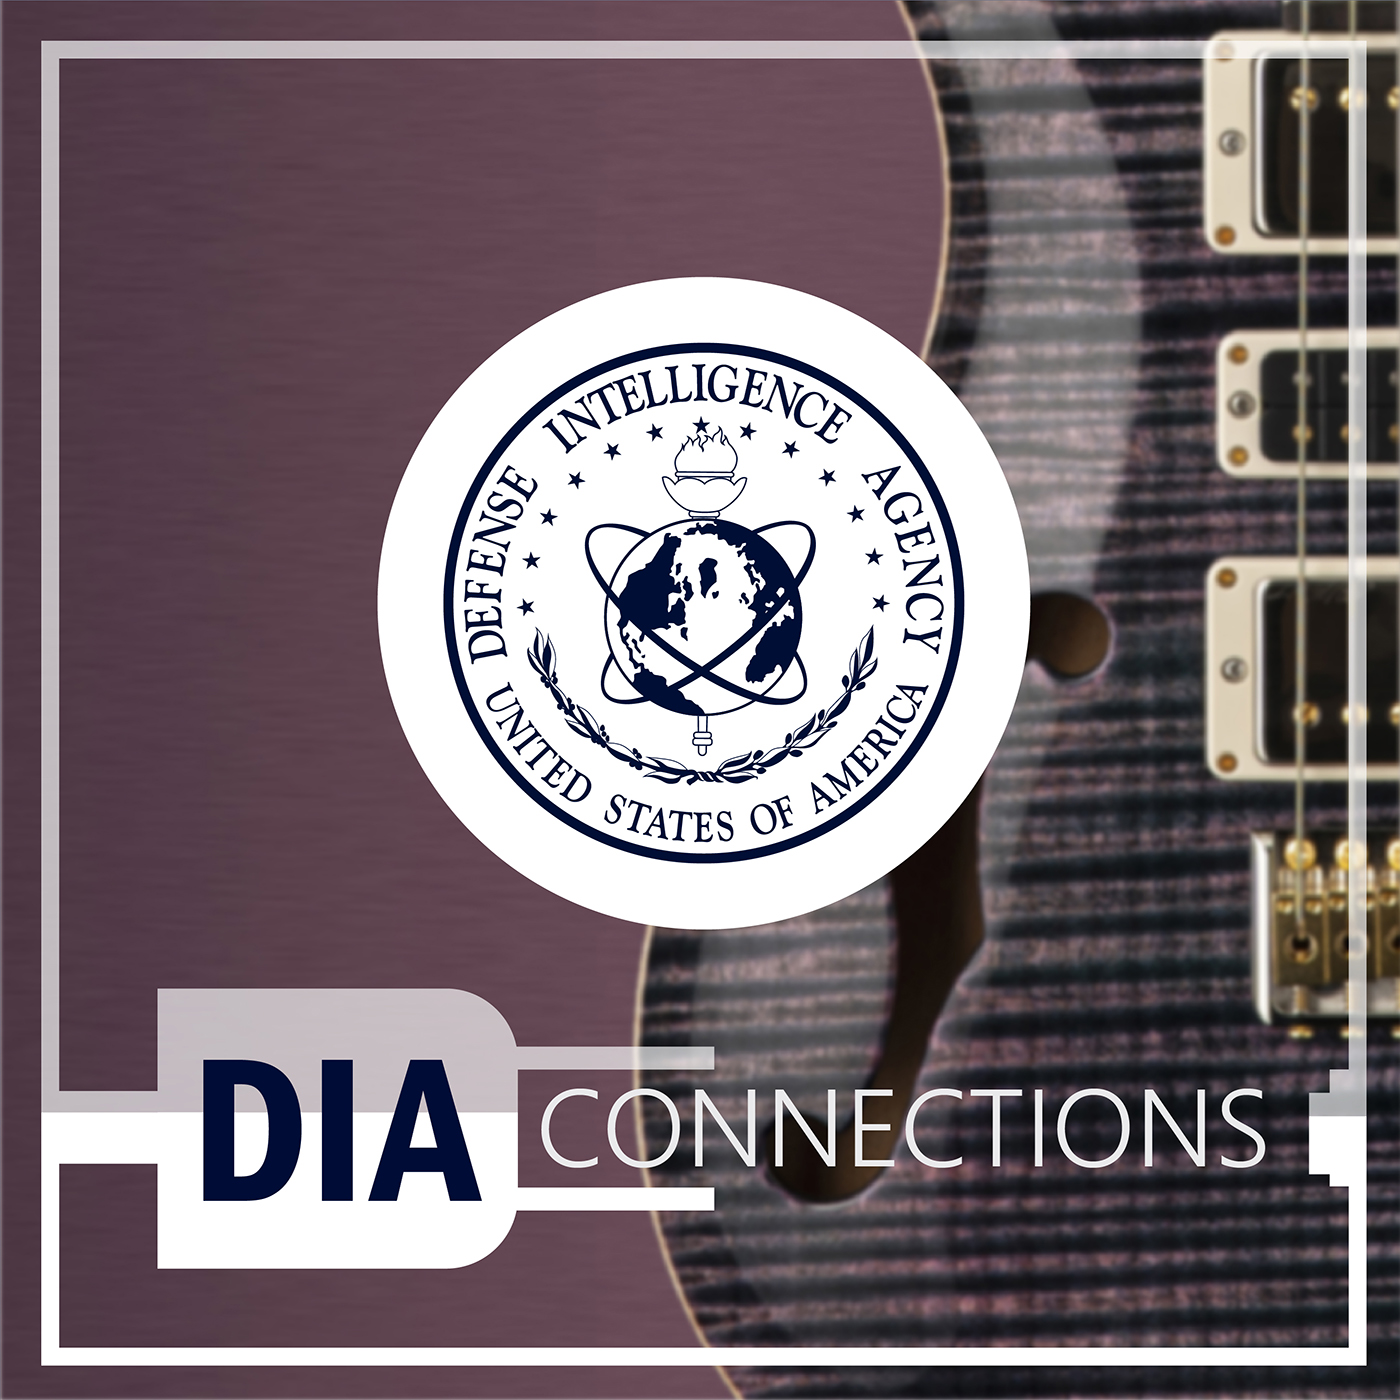 Image of guitar with D-I-A Seal and title. D-I-A Connections.